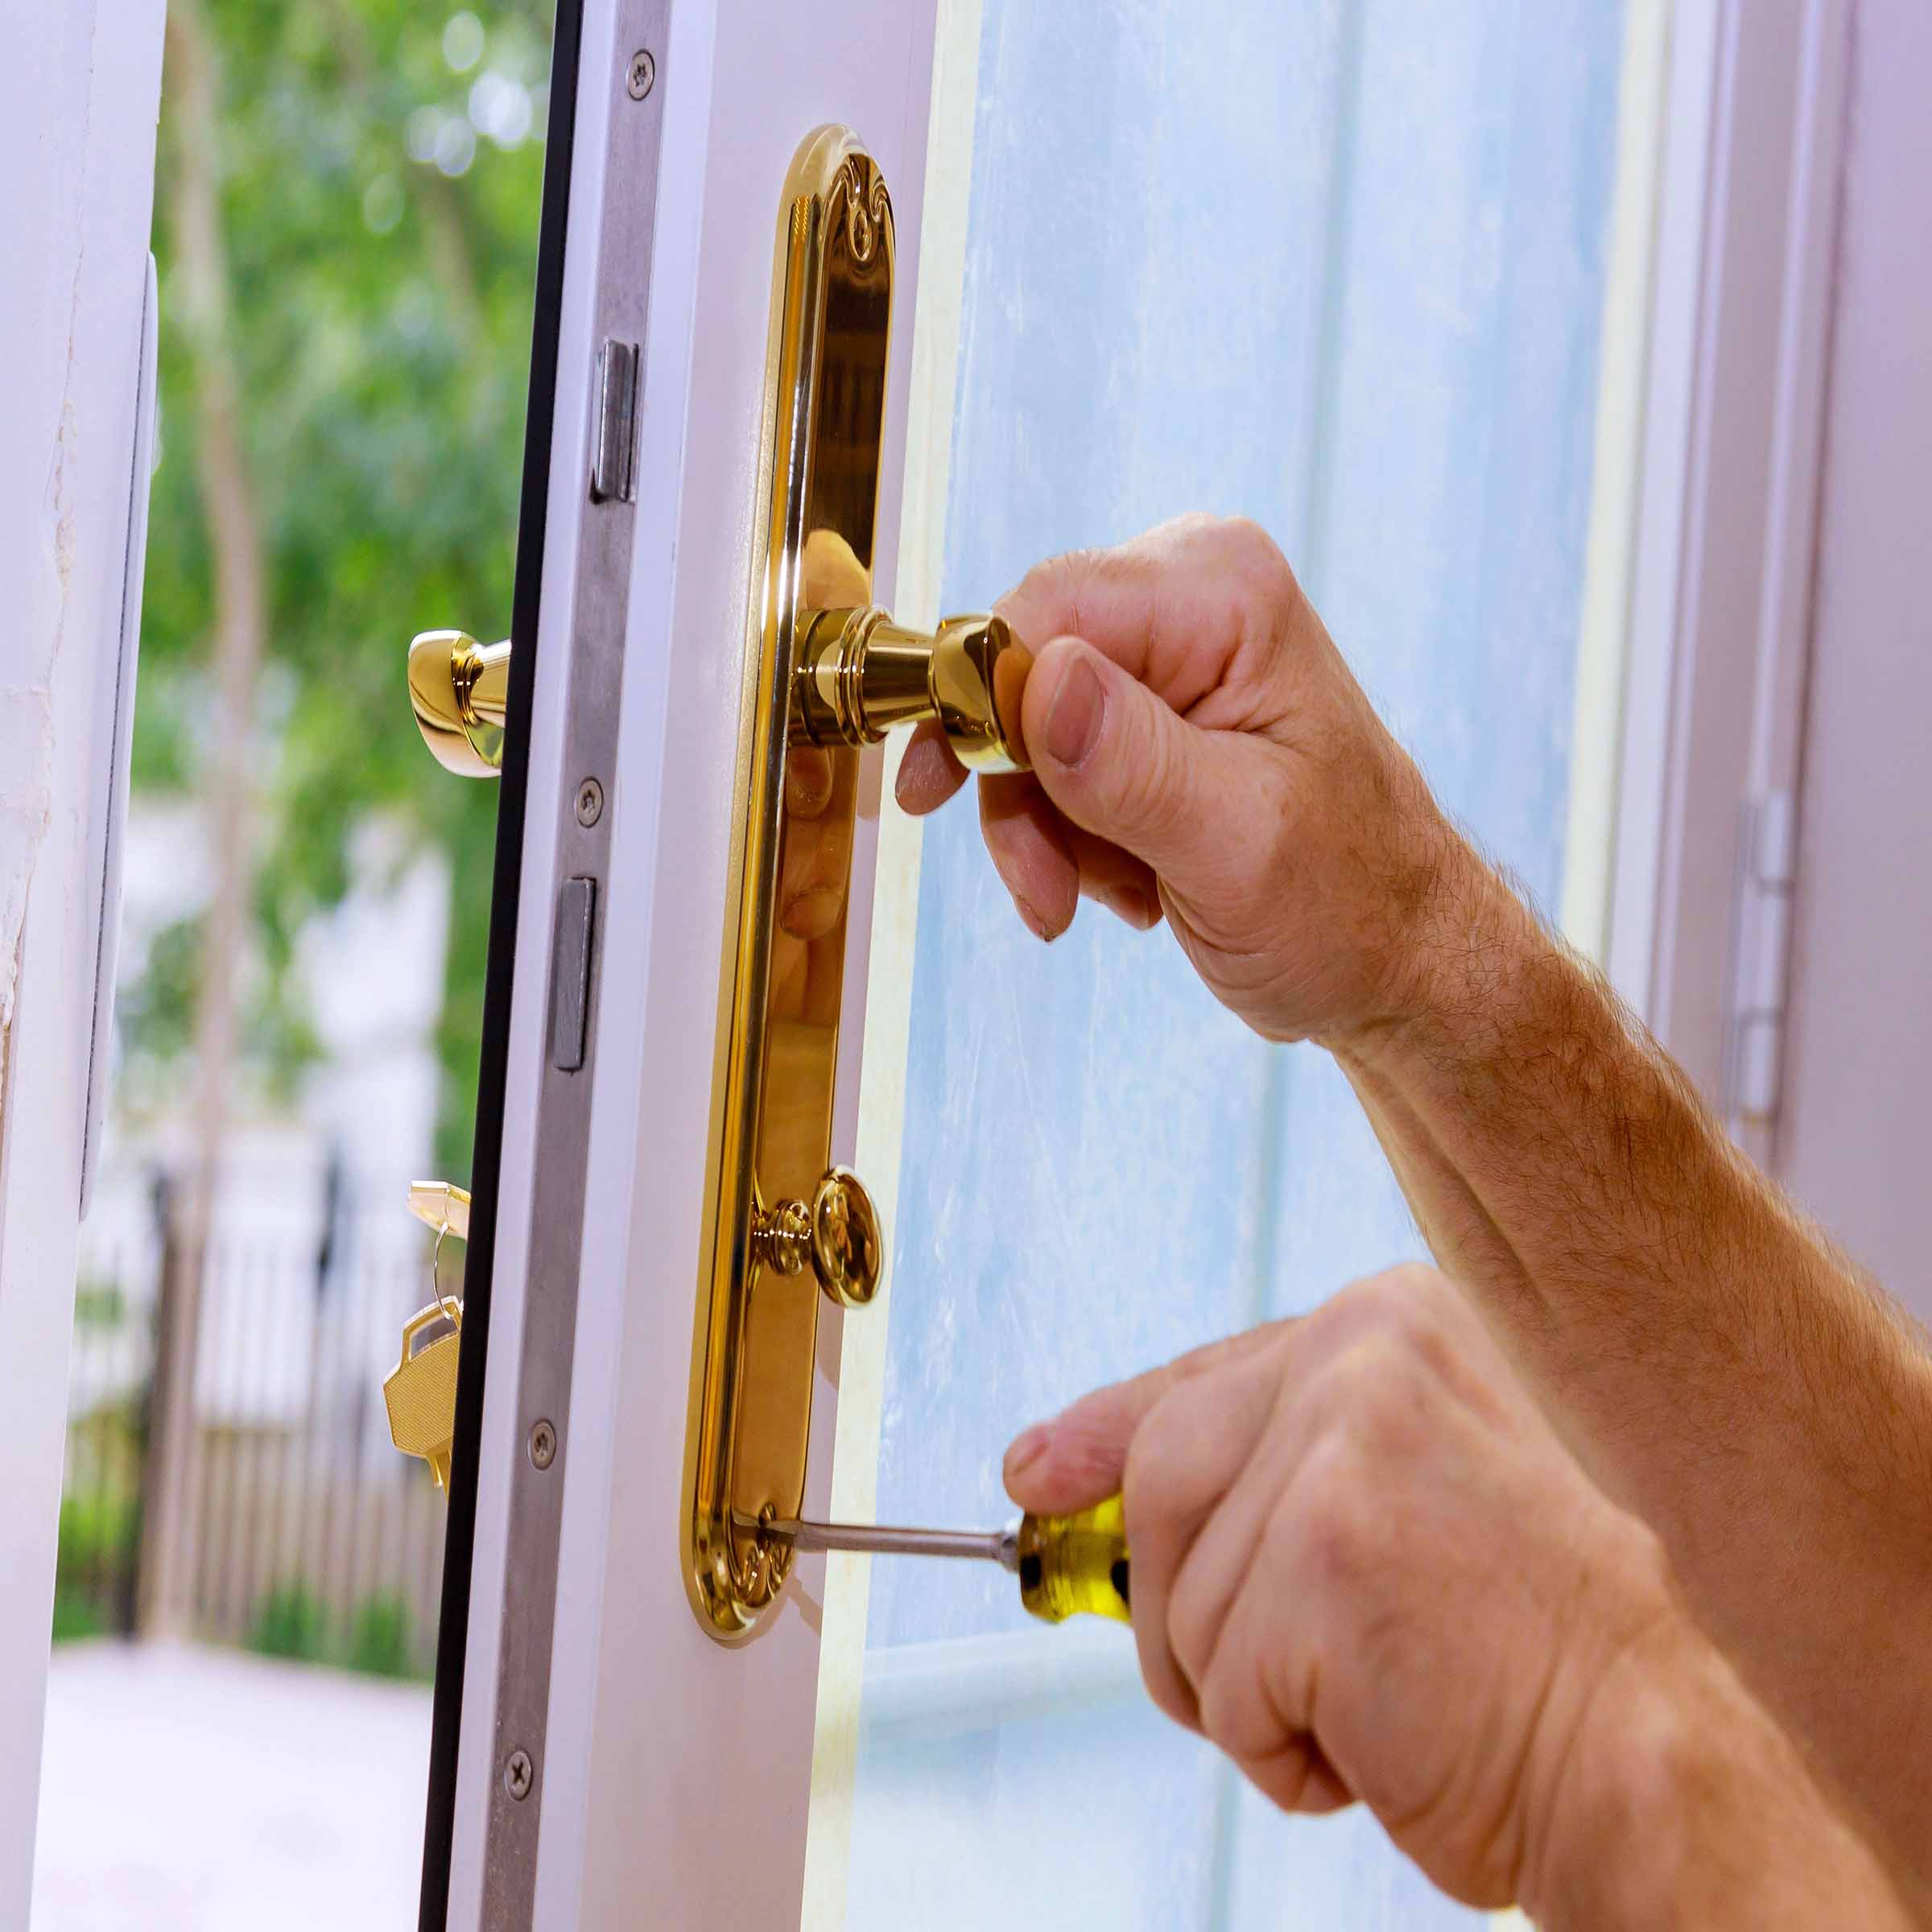 Do Locksmiths Need A License In Florida